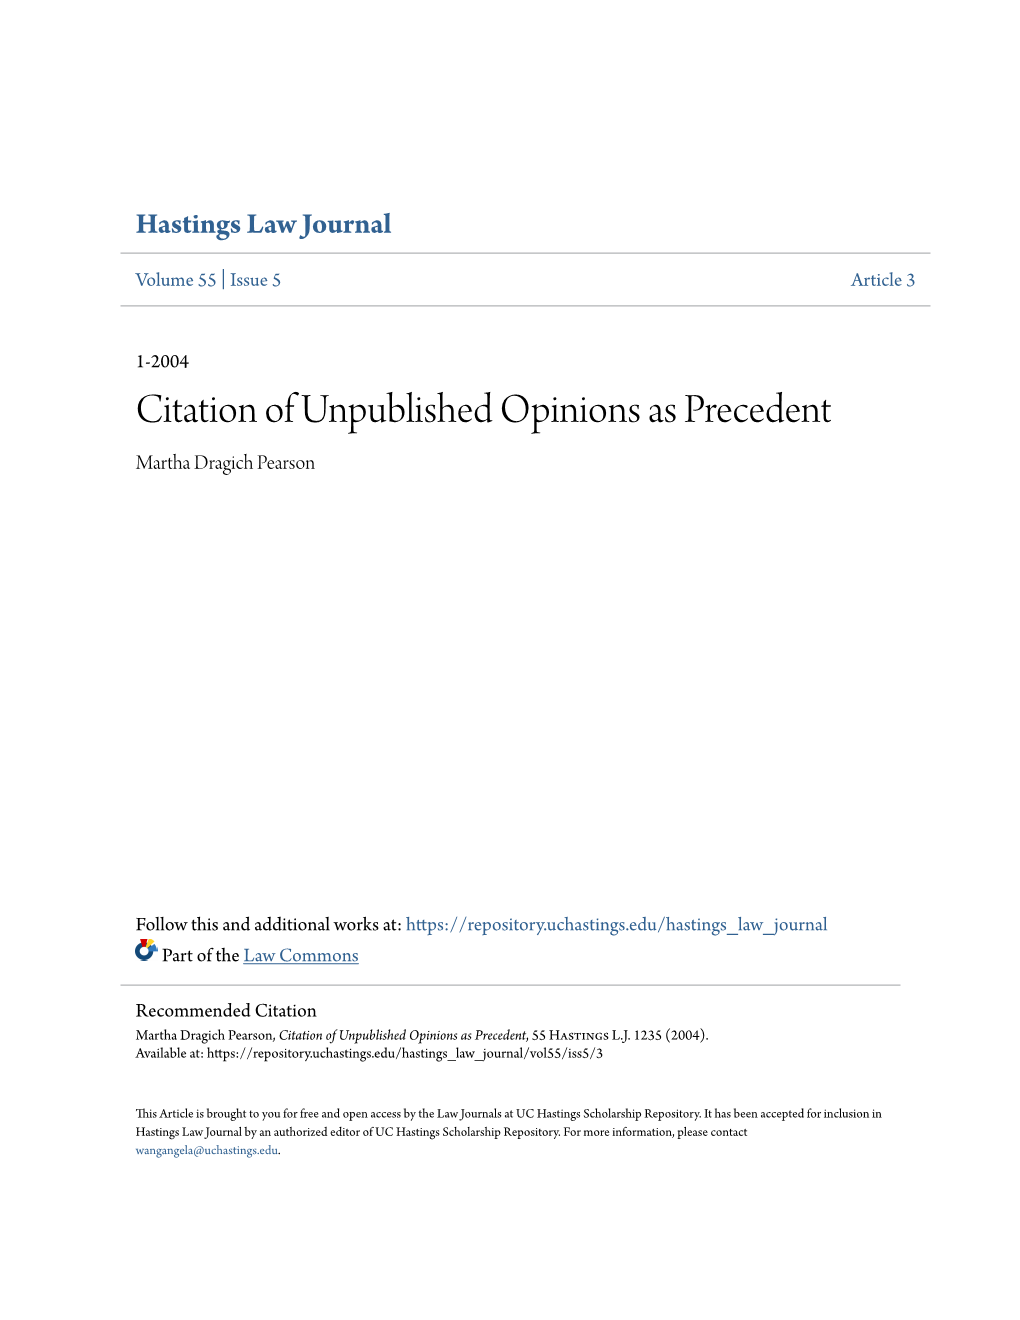 Citation of Unpublished Opinions As Precedent Martha Dragich Pearson